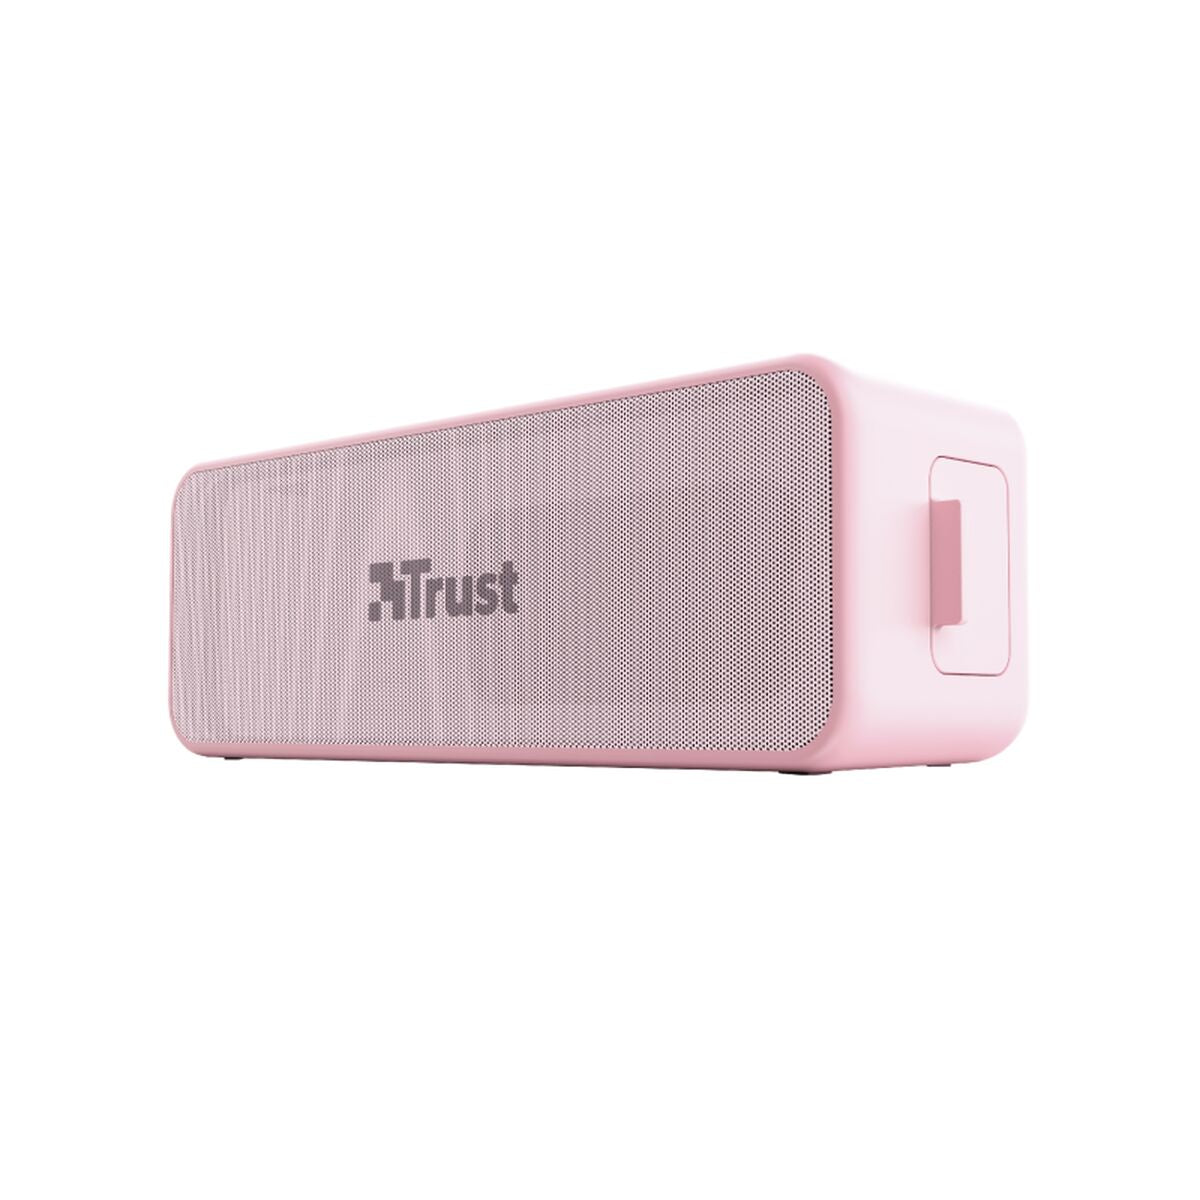 Portable Bluetooth Speakers Trust 23829 ZOWY MAX Pink, Trust, Electronics, Mobile communication and accessories, portable-bluetooth-speakers-trust-23829-zowy-max-pink, Brand_Trust, category-reference-2609, category-reference-2882, category-reference-2923, category-reference-t-19653, category-reference-t-21311, category-reference-t-4036, category-reference-t-4037, Condition_NEW, entertainment, music, Price_50 - 100, RiotNook